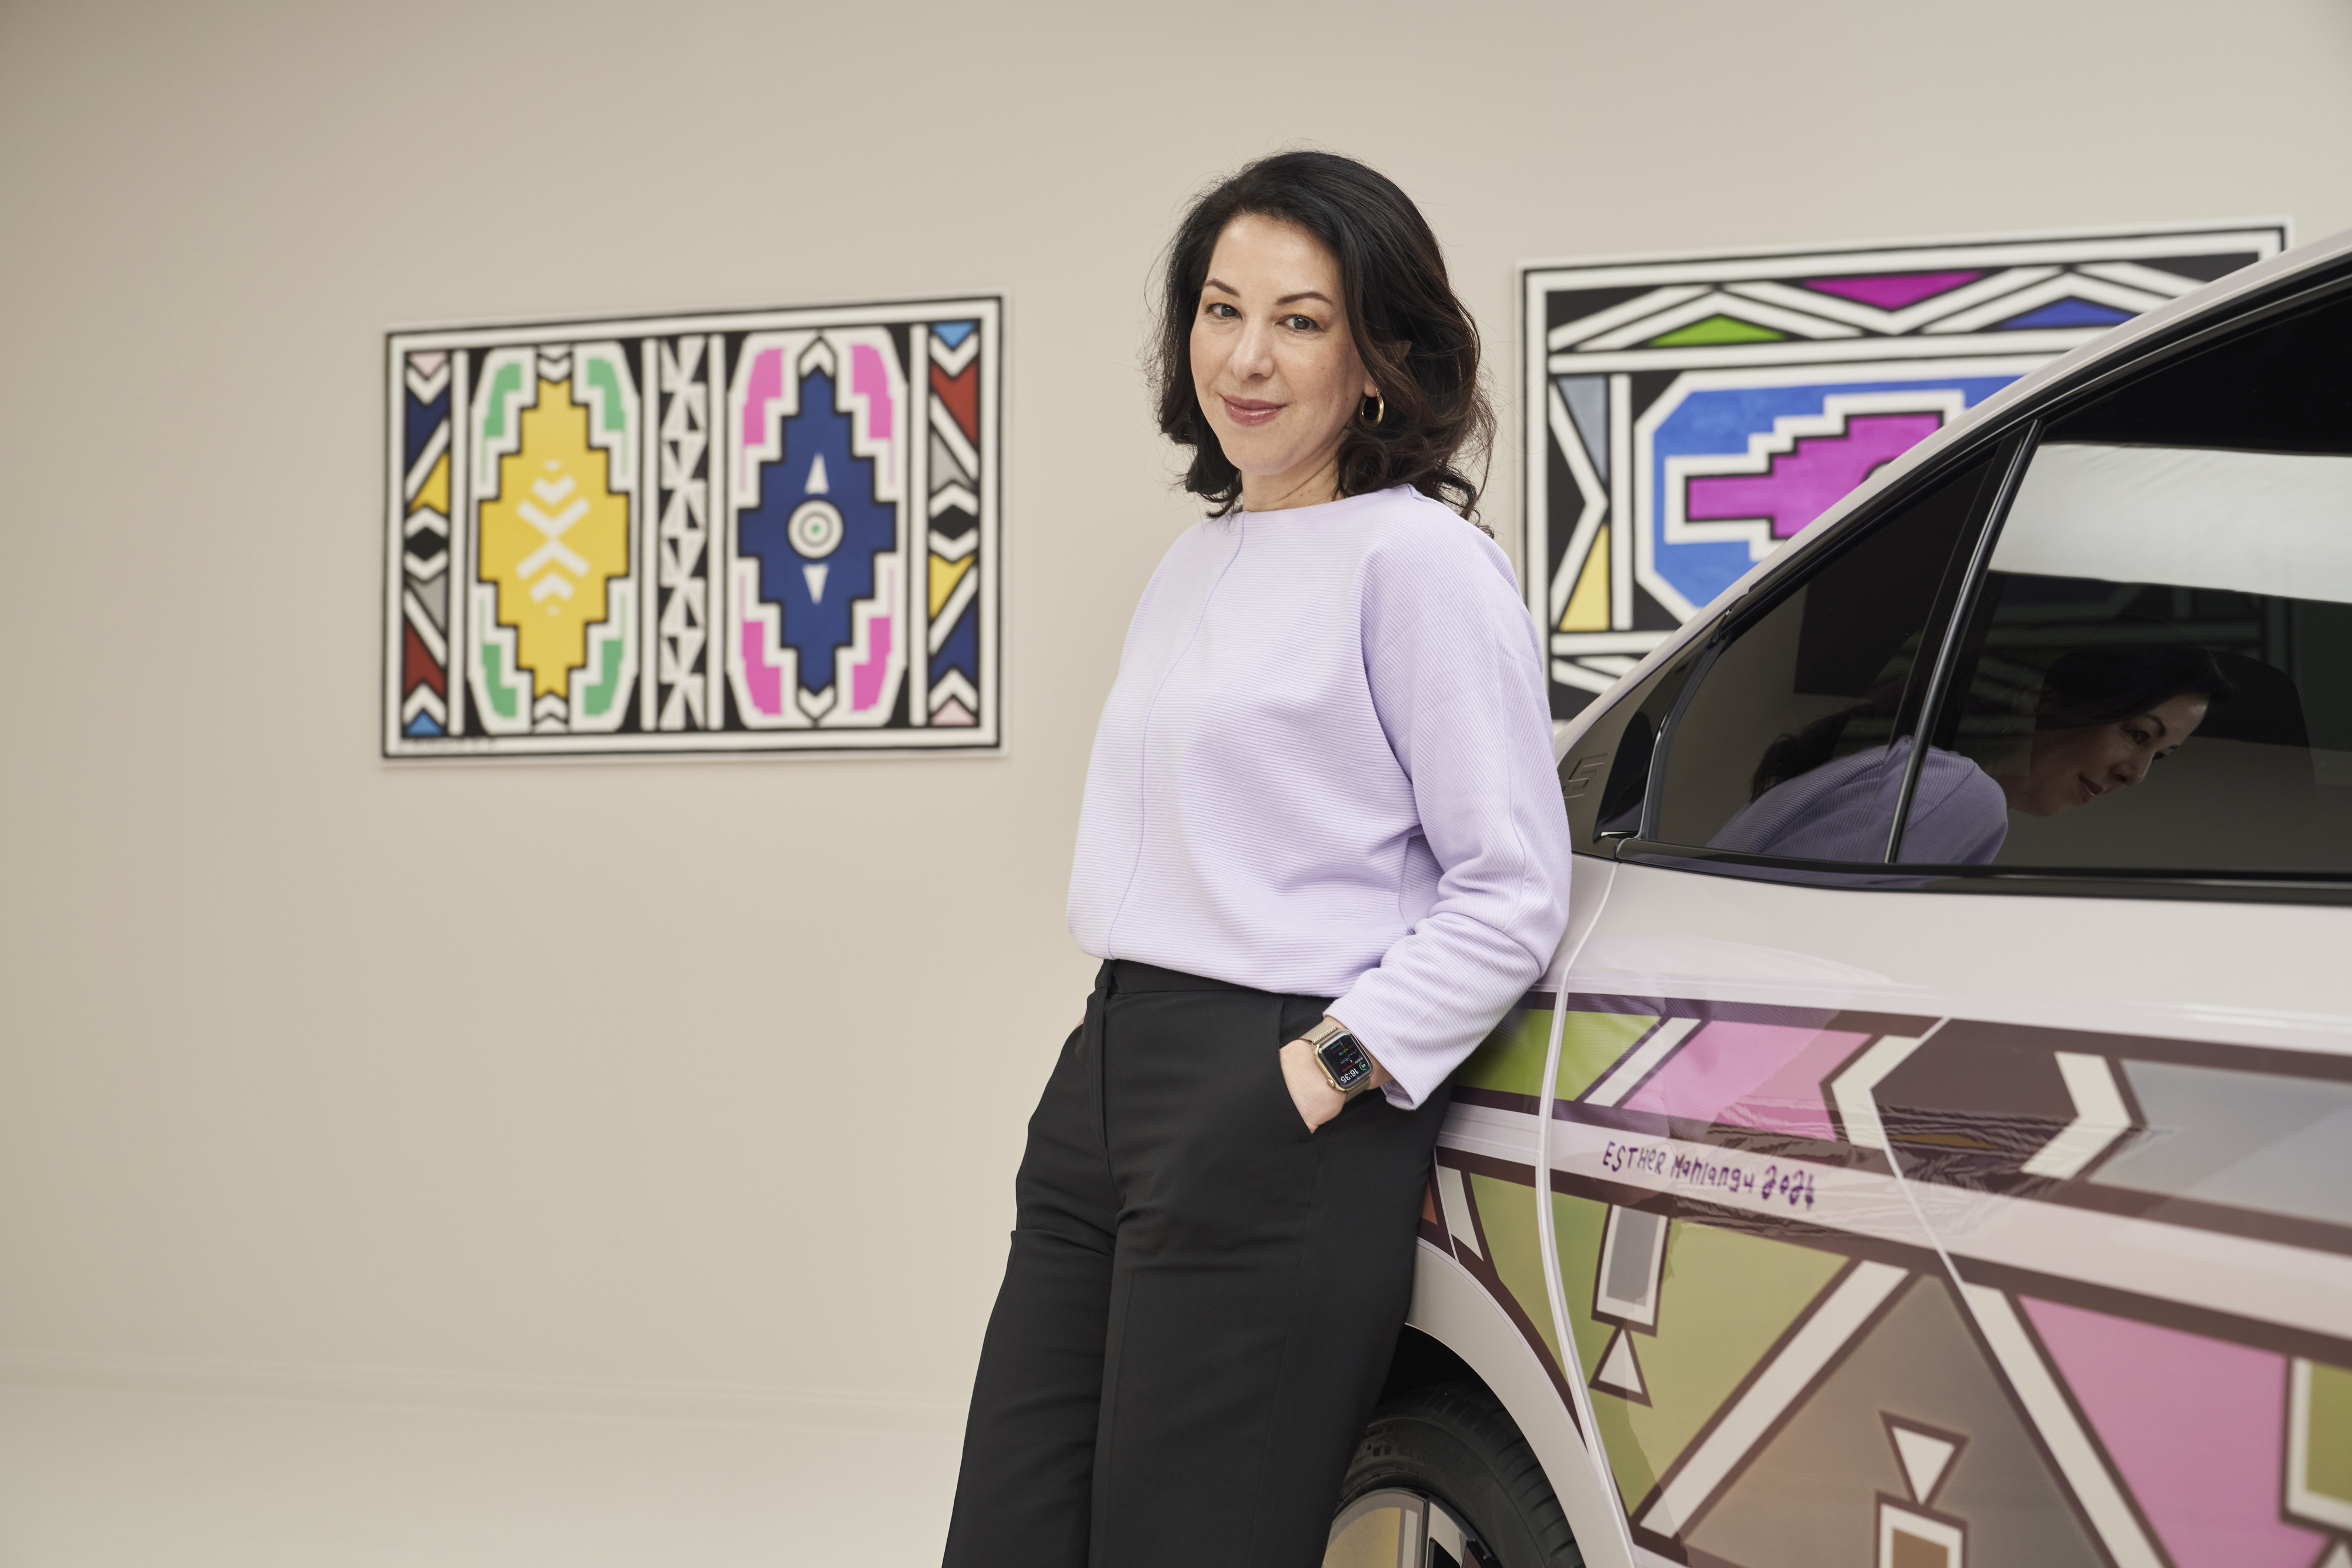 Woman in a purple top and black pants standing beside a car with graphic patterns, artwork on the wall behind